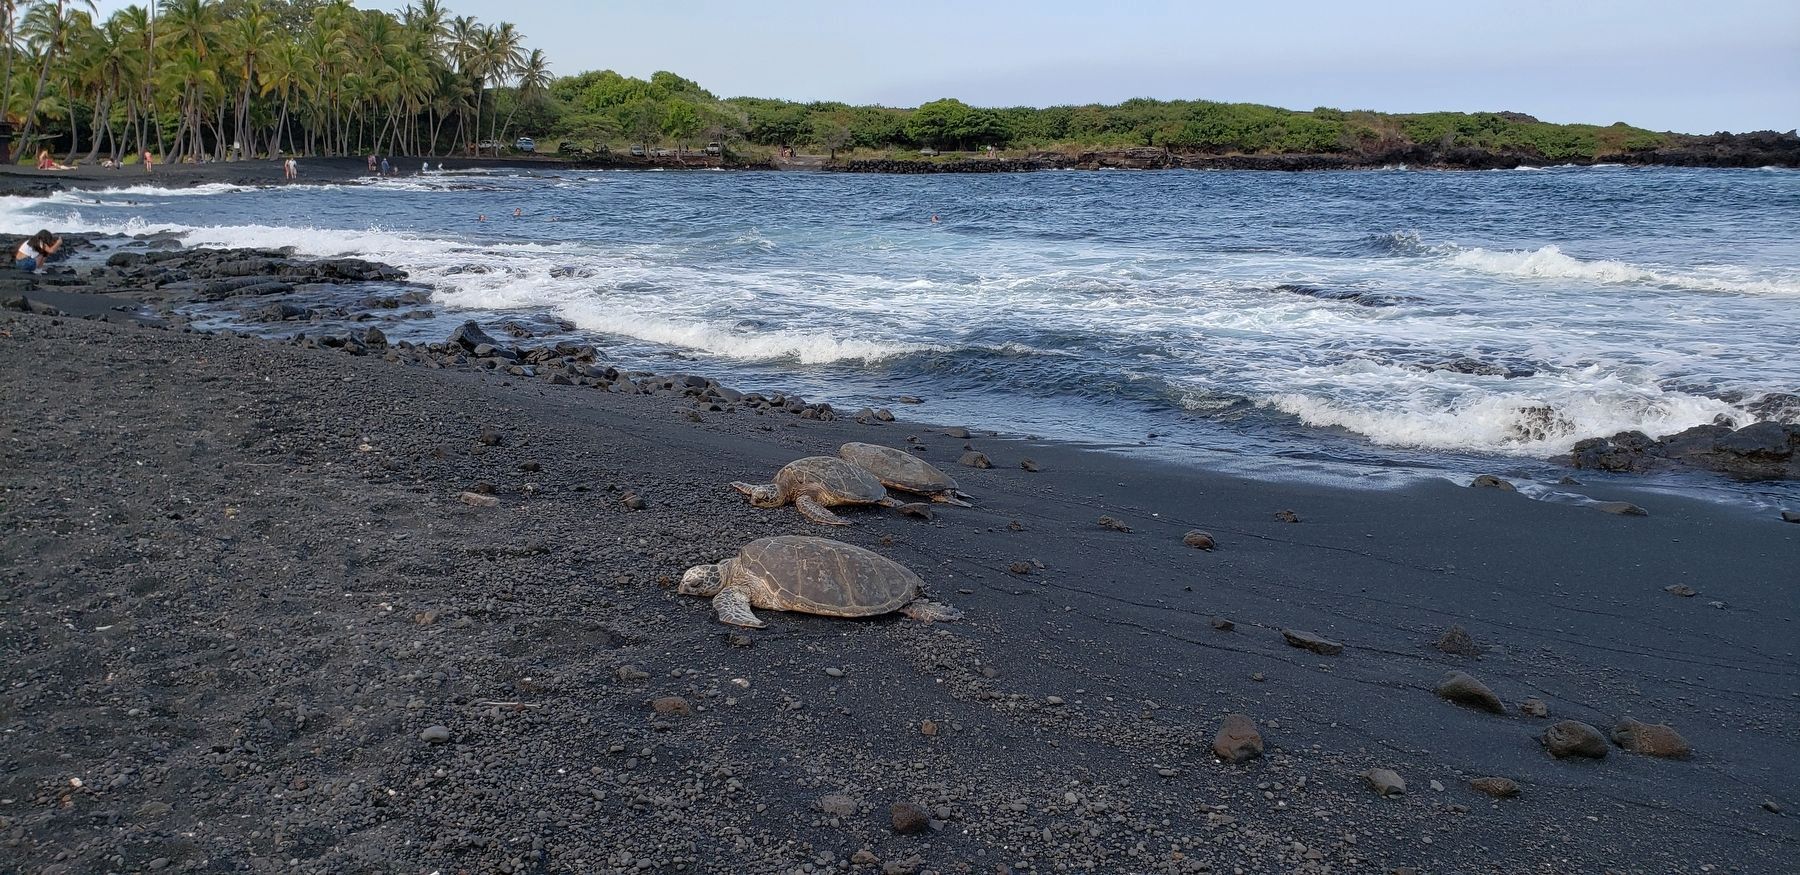 Turtles on Punalu'u Black Sand Beach (<i>view from near marker</i>) image. Click for full size.